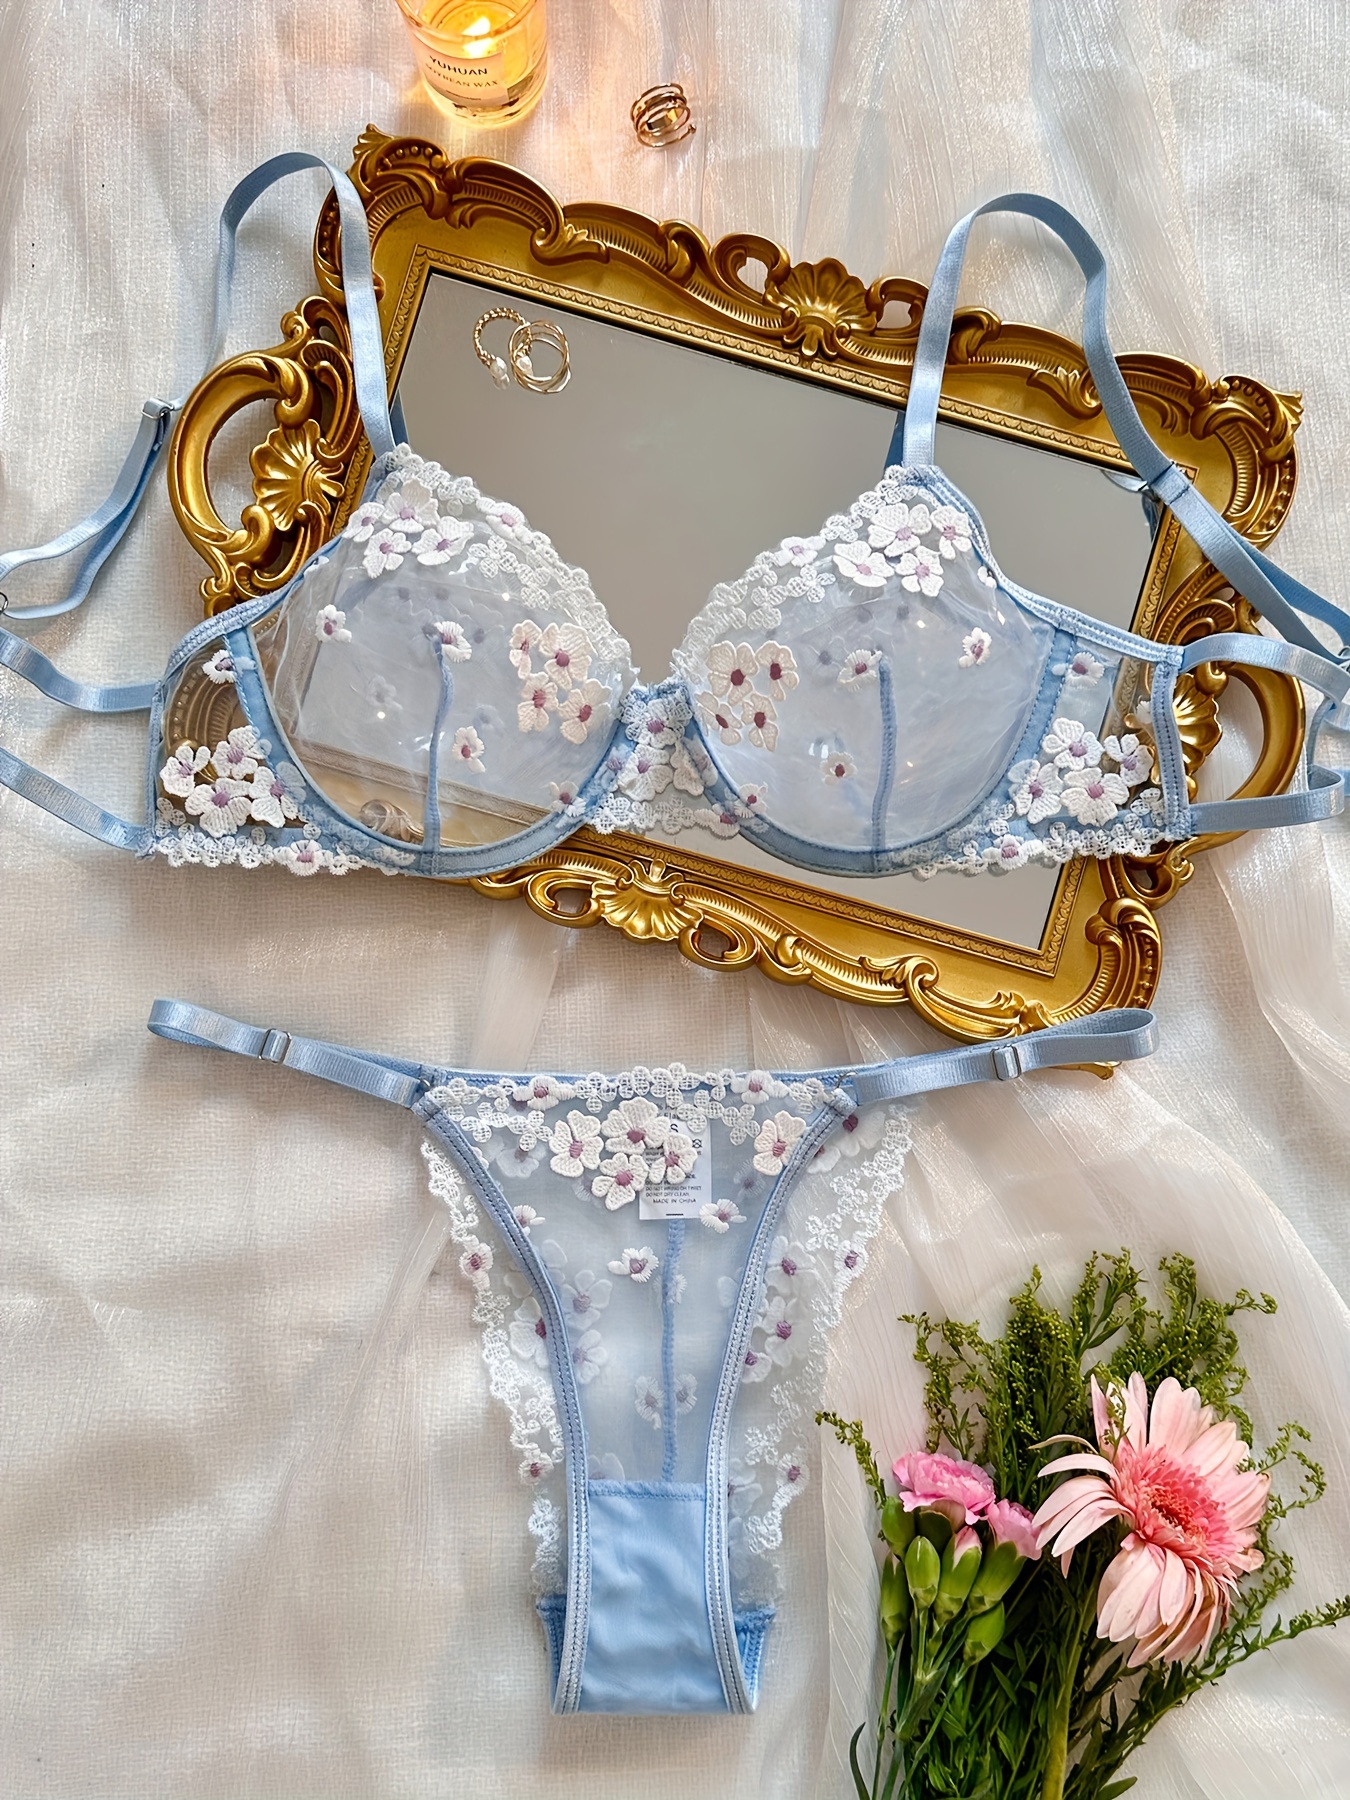 YDKZYMD Lingerie Set for Women Sexy Mesh Girlish Floral Embroidered Bra and  Panty Light/Blue/Pink L 